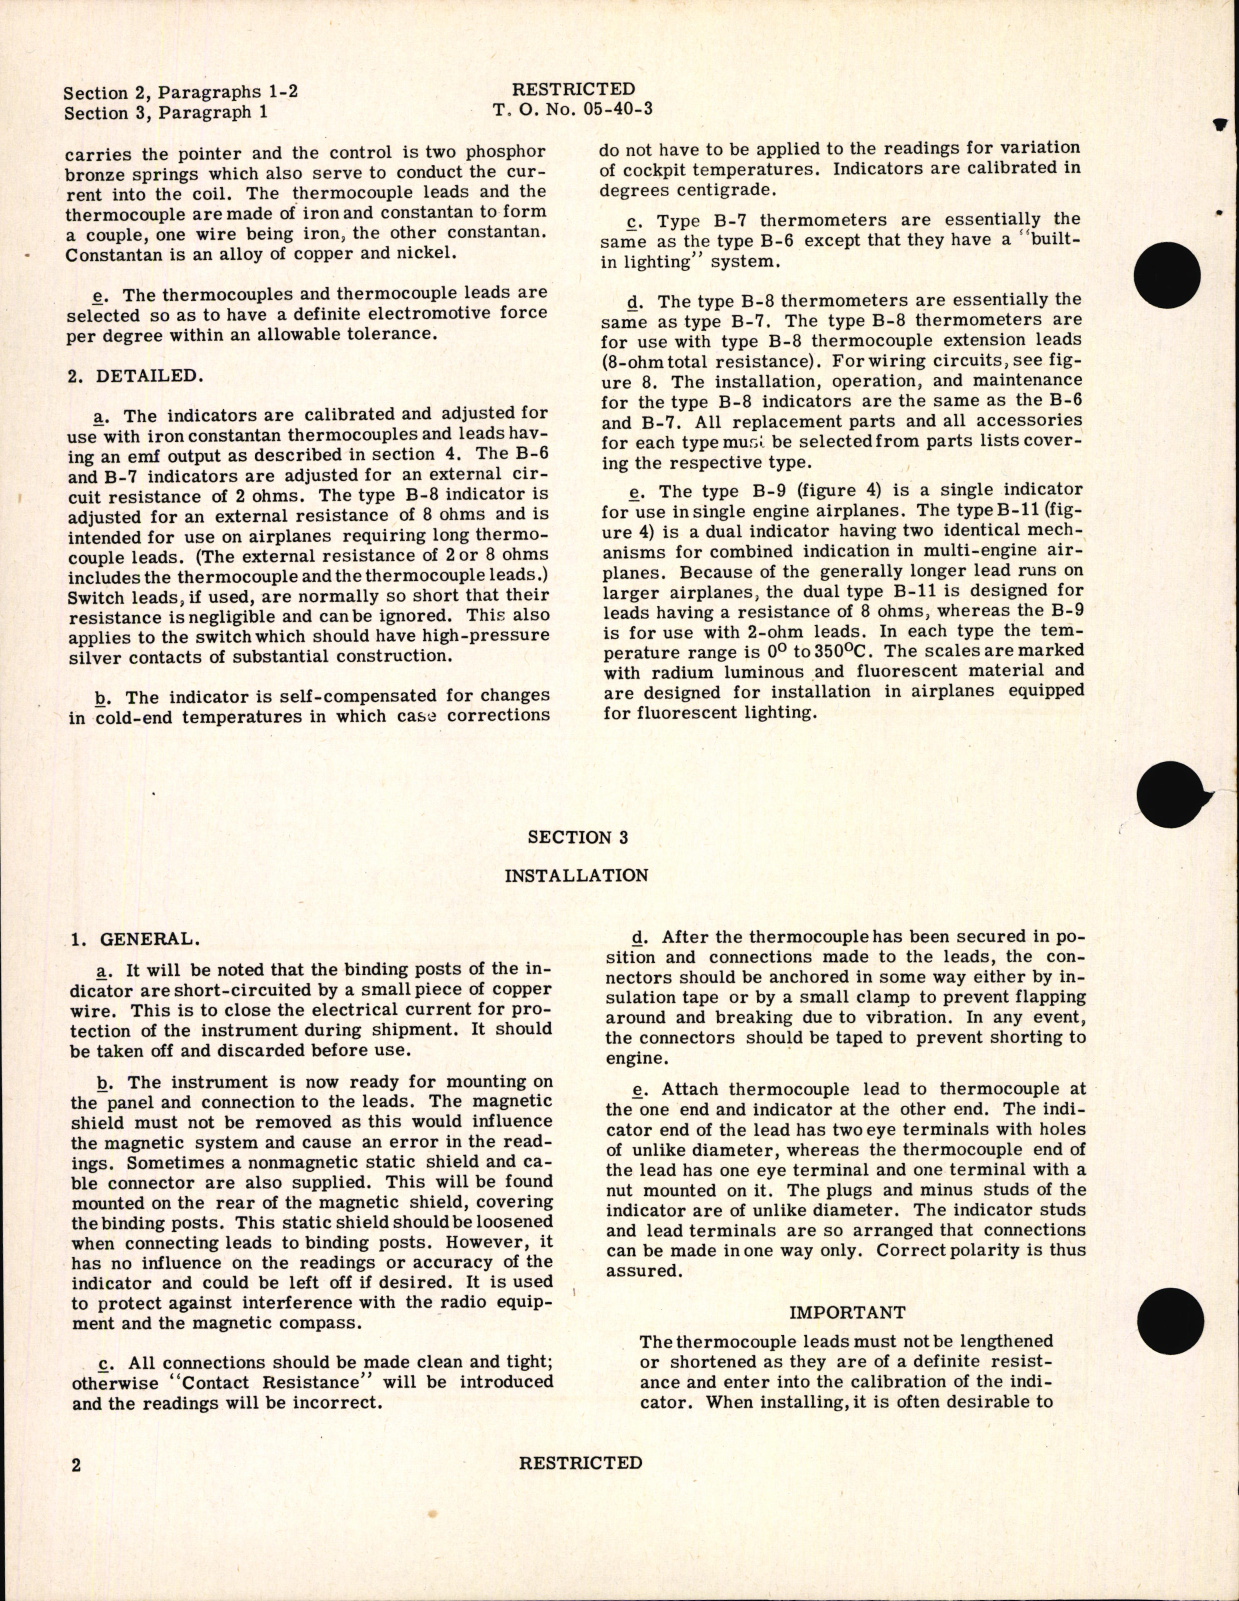 Sample page 8 from AirCorps Library document: Handbook of Instructions with Parts Catalog for Thermocouple Thermometers